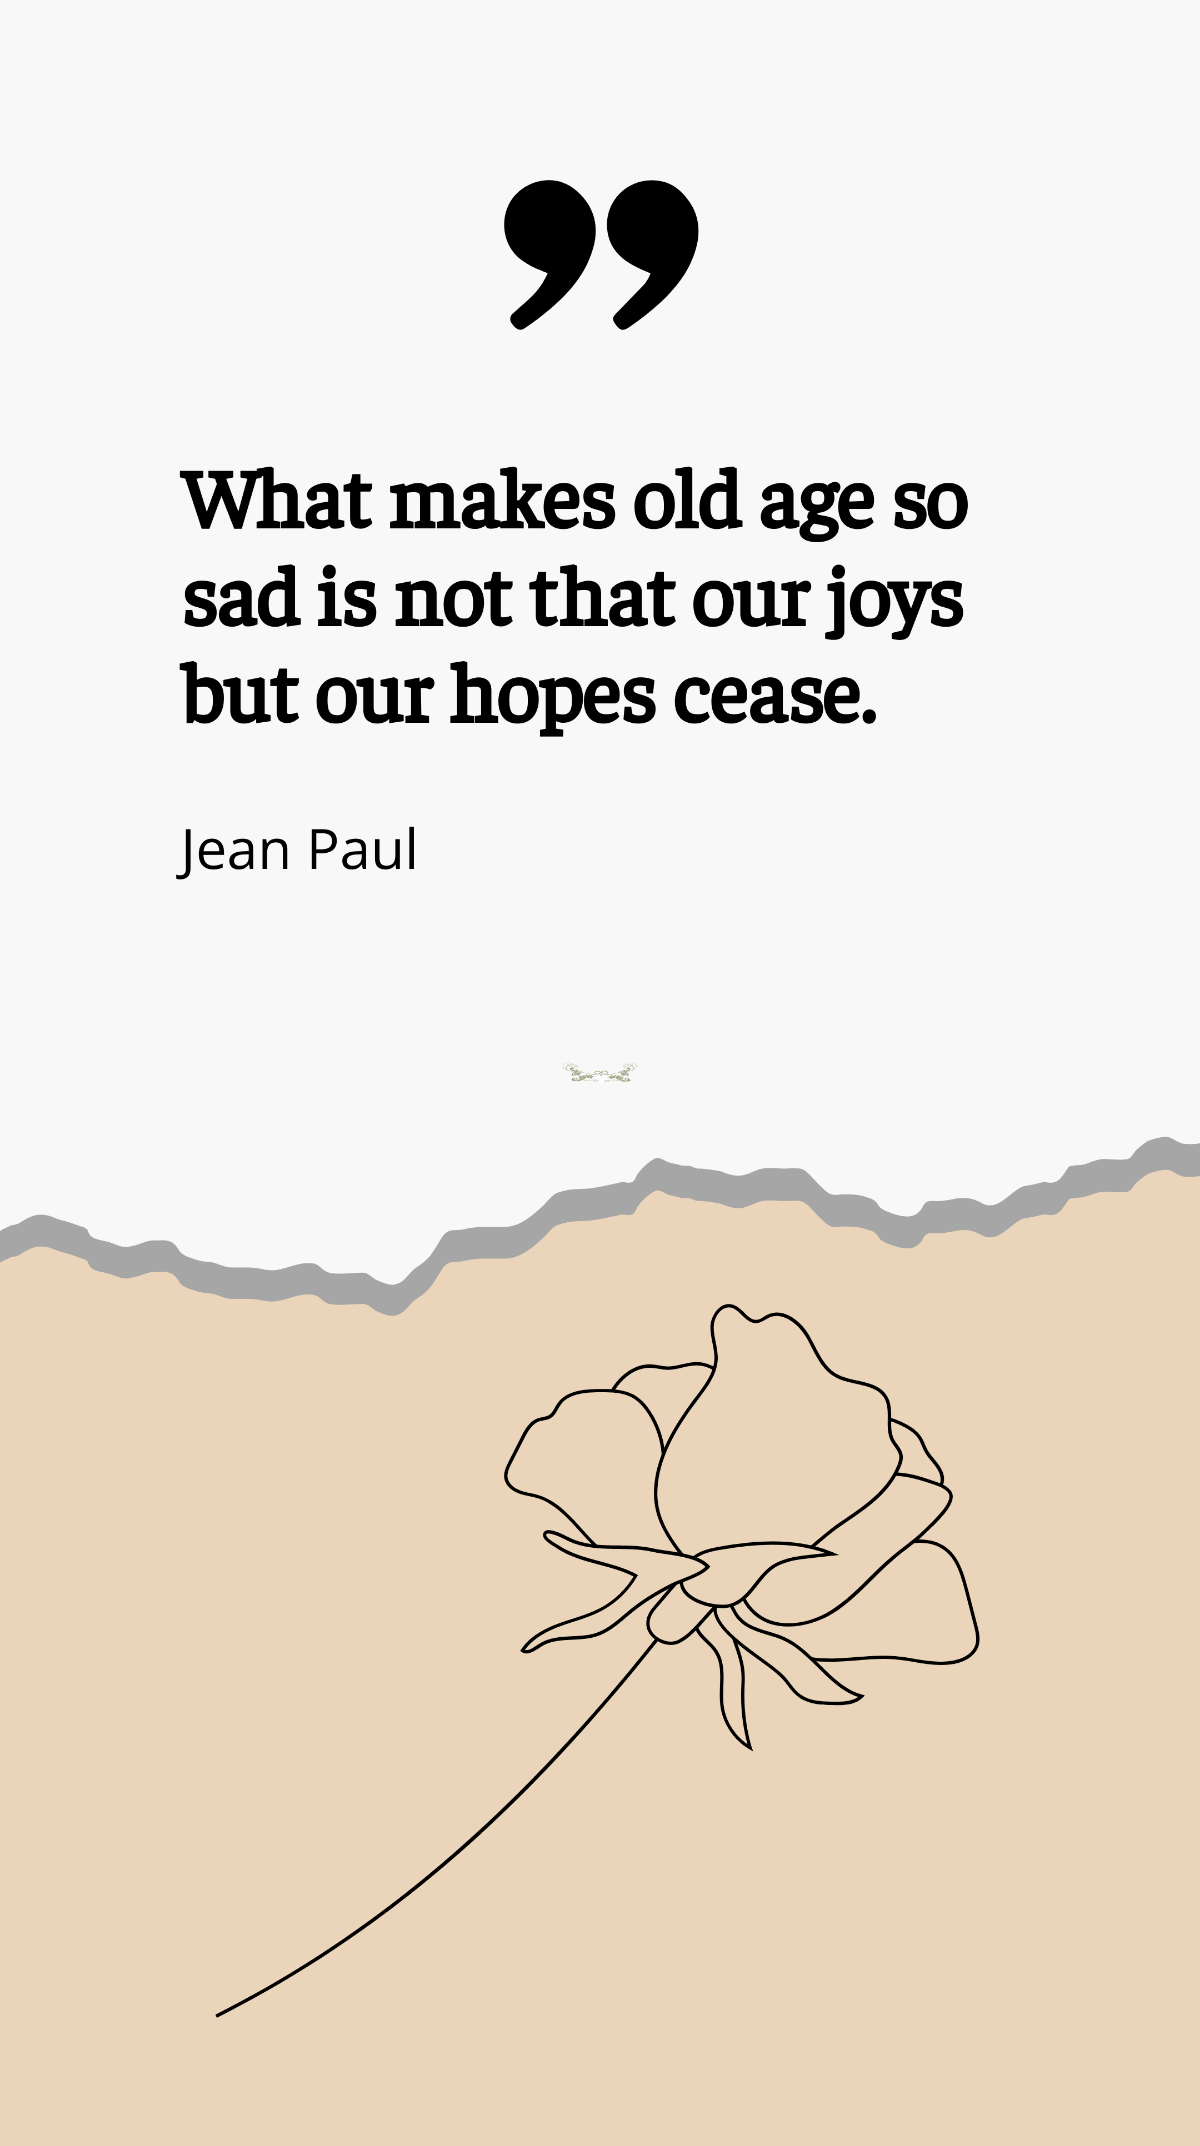 Jean Paul - What makes old age so sad is not that our joys but our hopes cease. Template